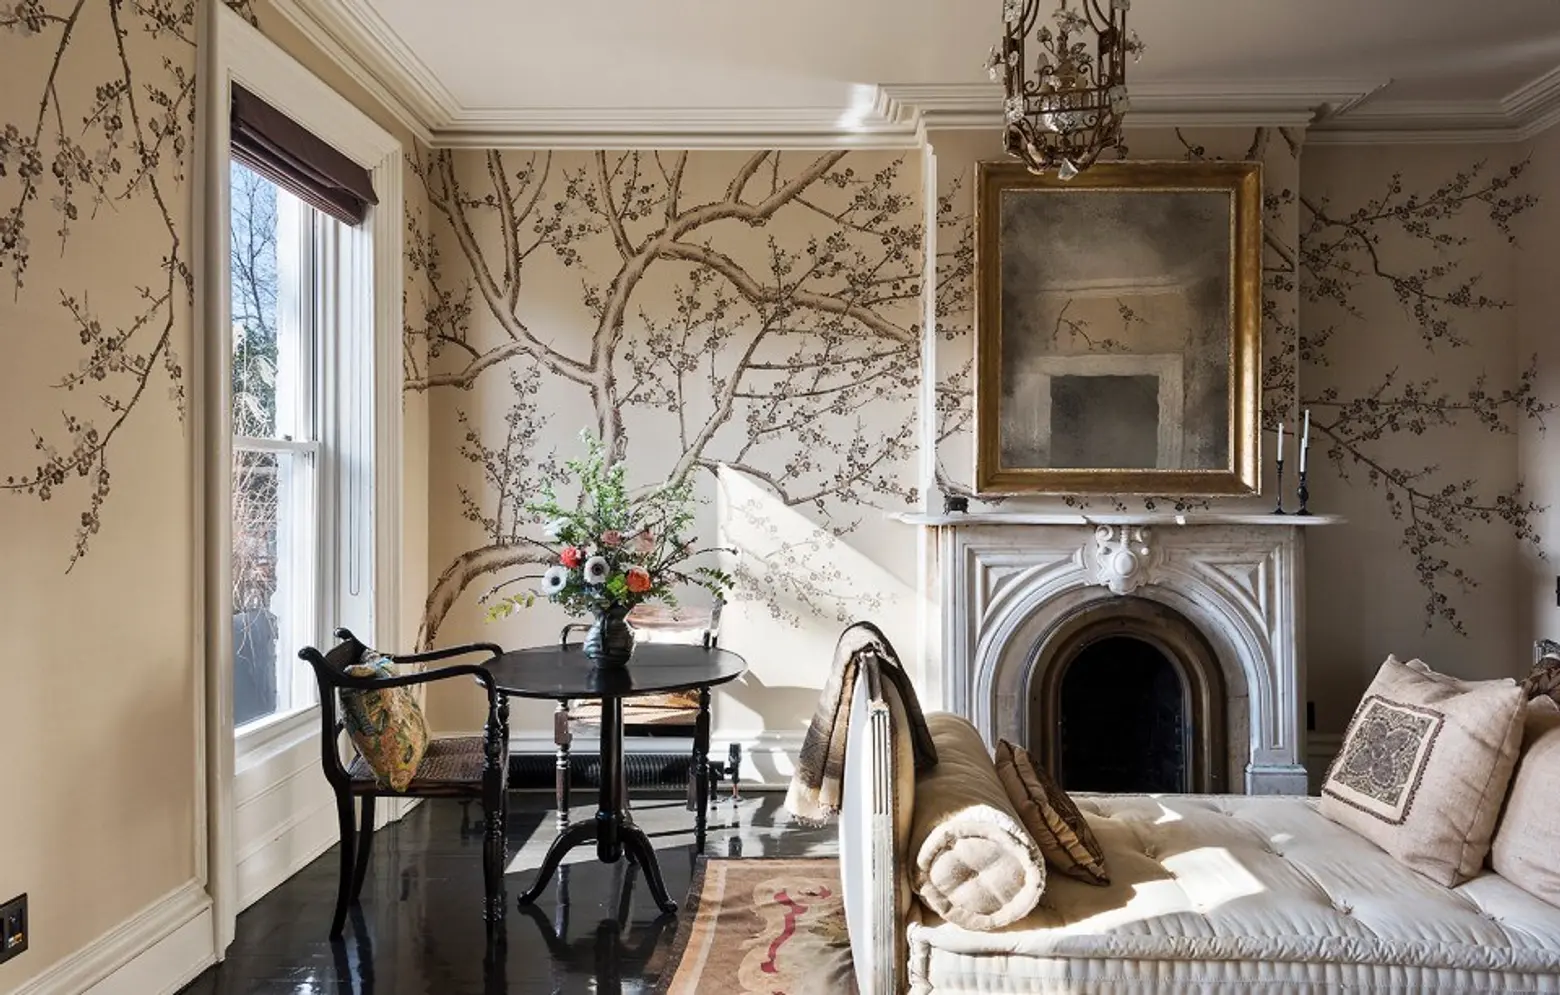 178 Garfield Place, Vince Clarke, Jenna Lyons, Tracy Martin, Morbid Anatomy Museum, Roman and Williams, townhouse, Park Slope, brownstone, outdoor space, interiors